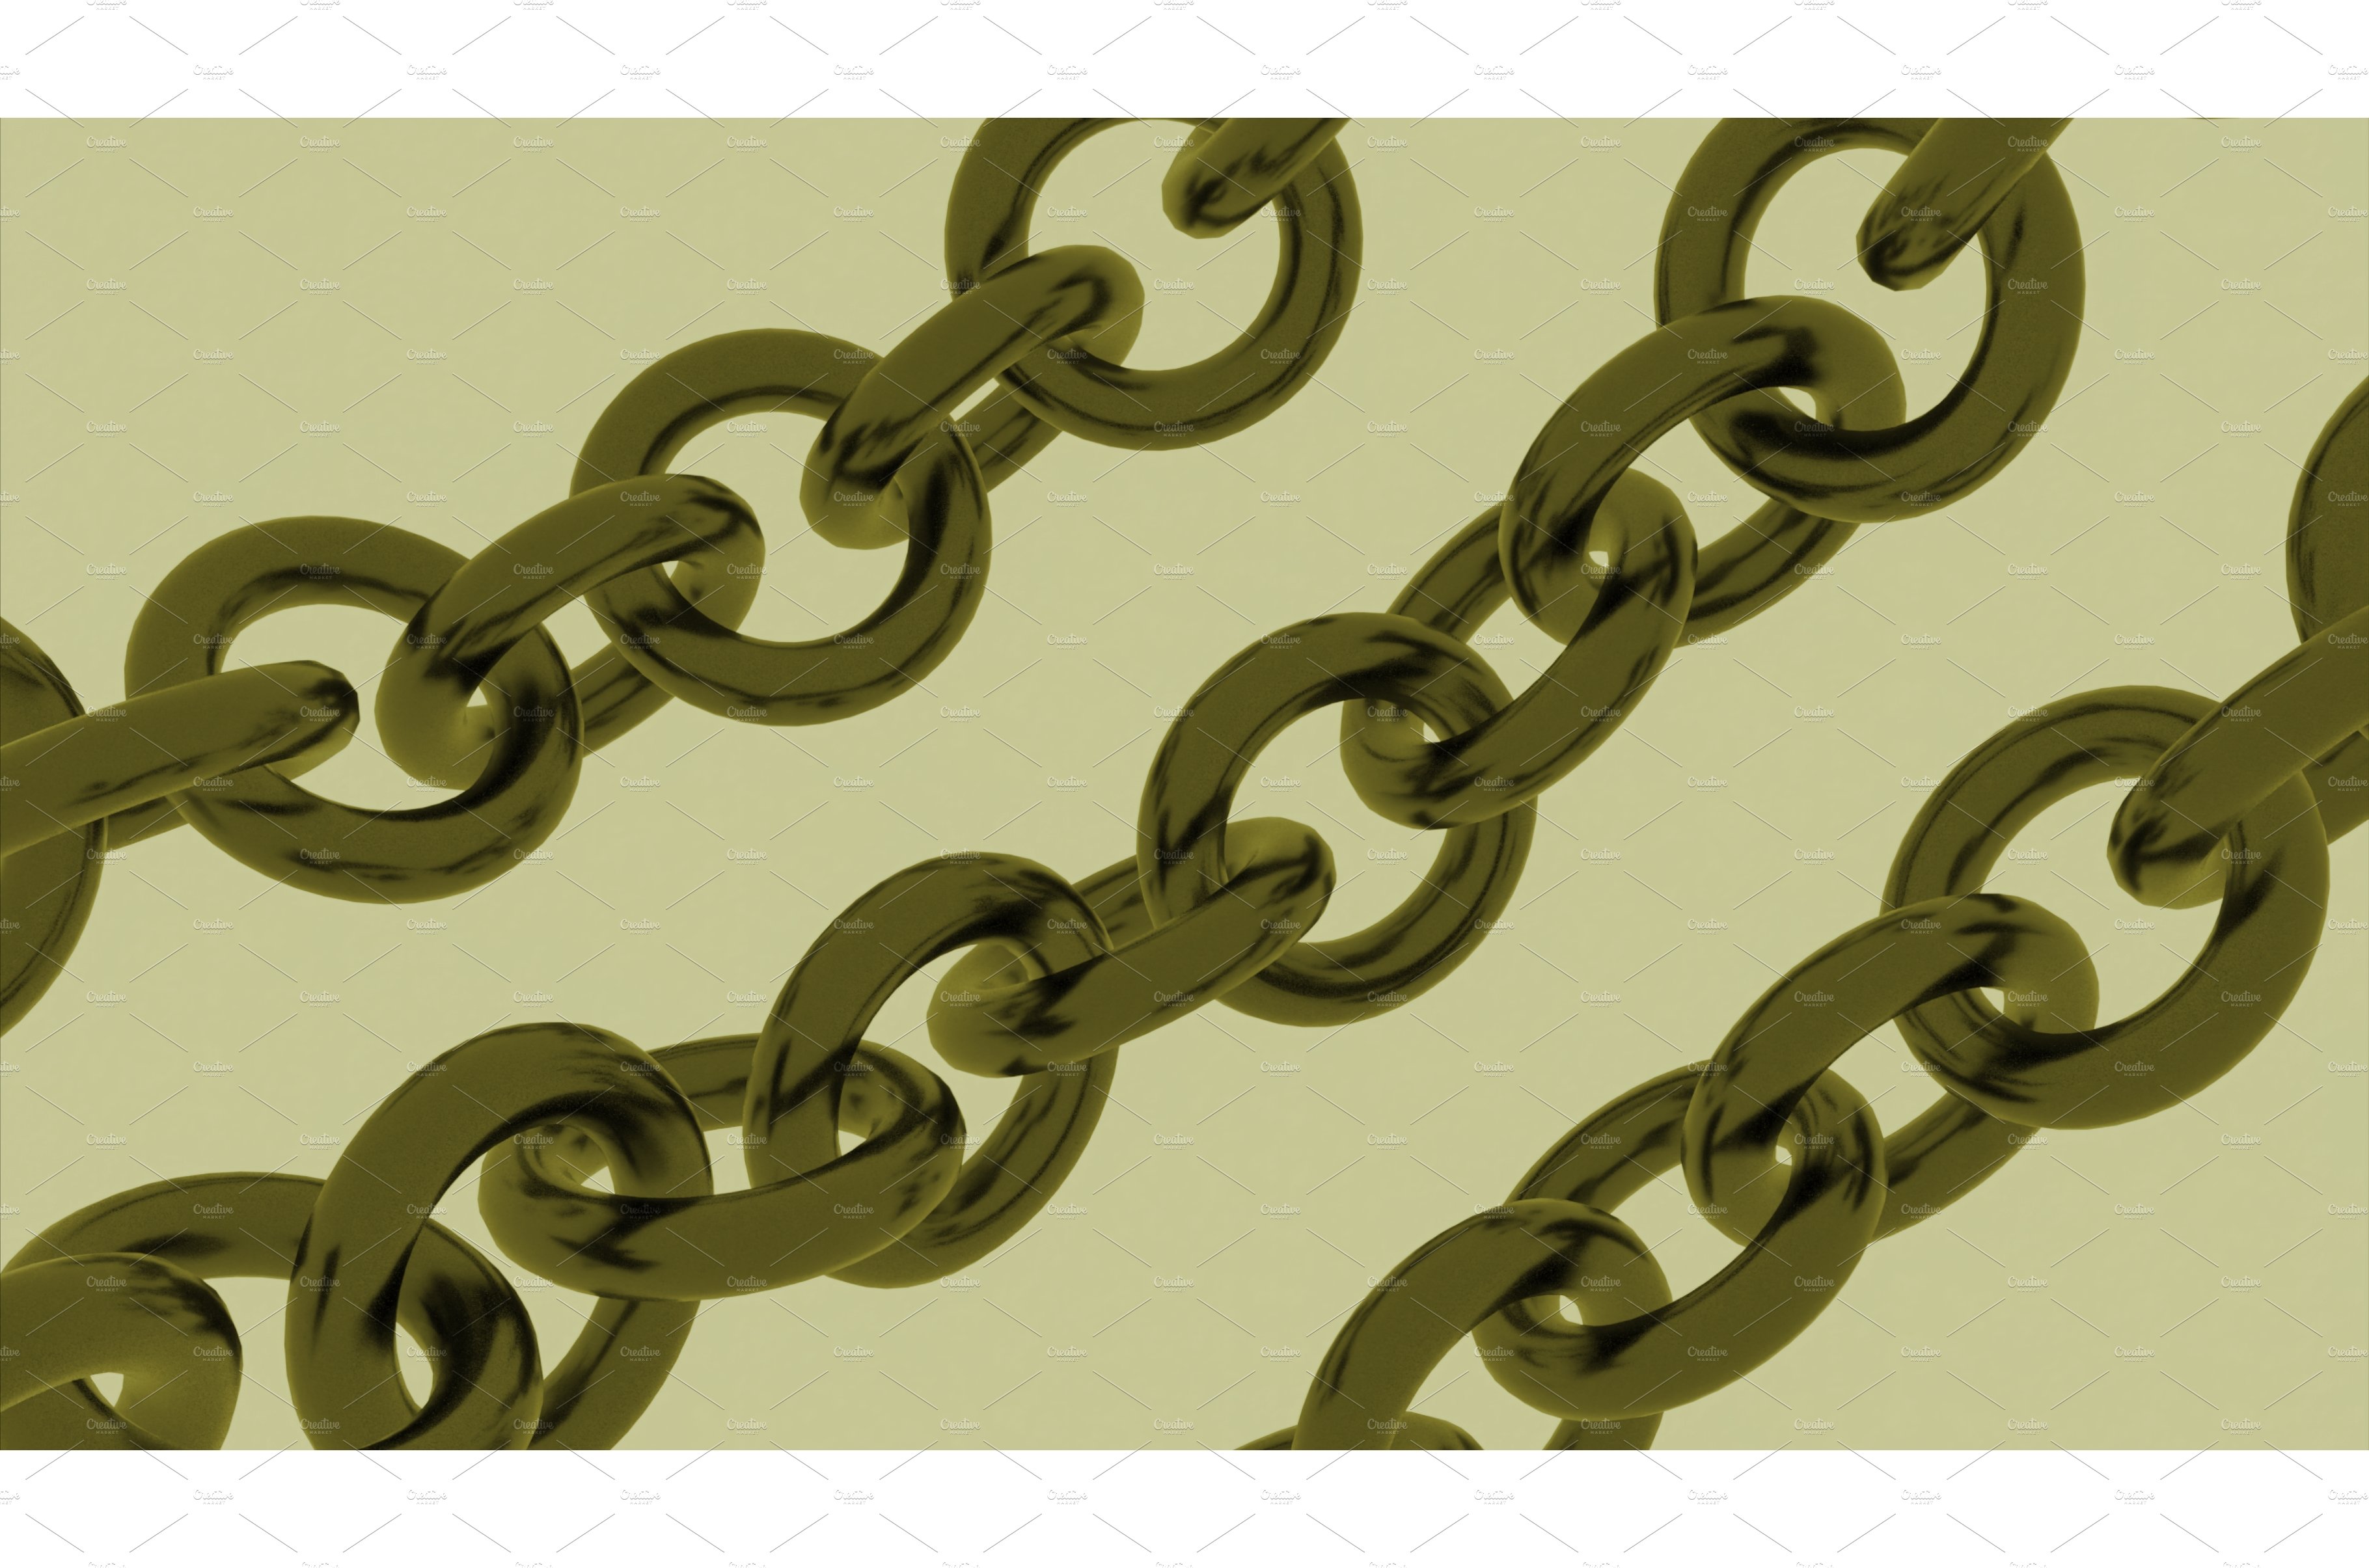 Three rows of metal gold chains cover image.